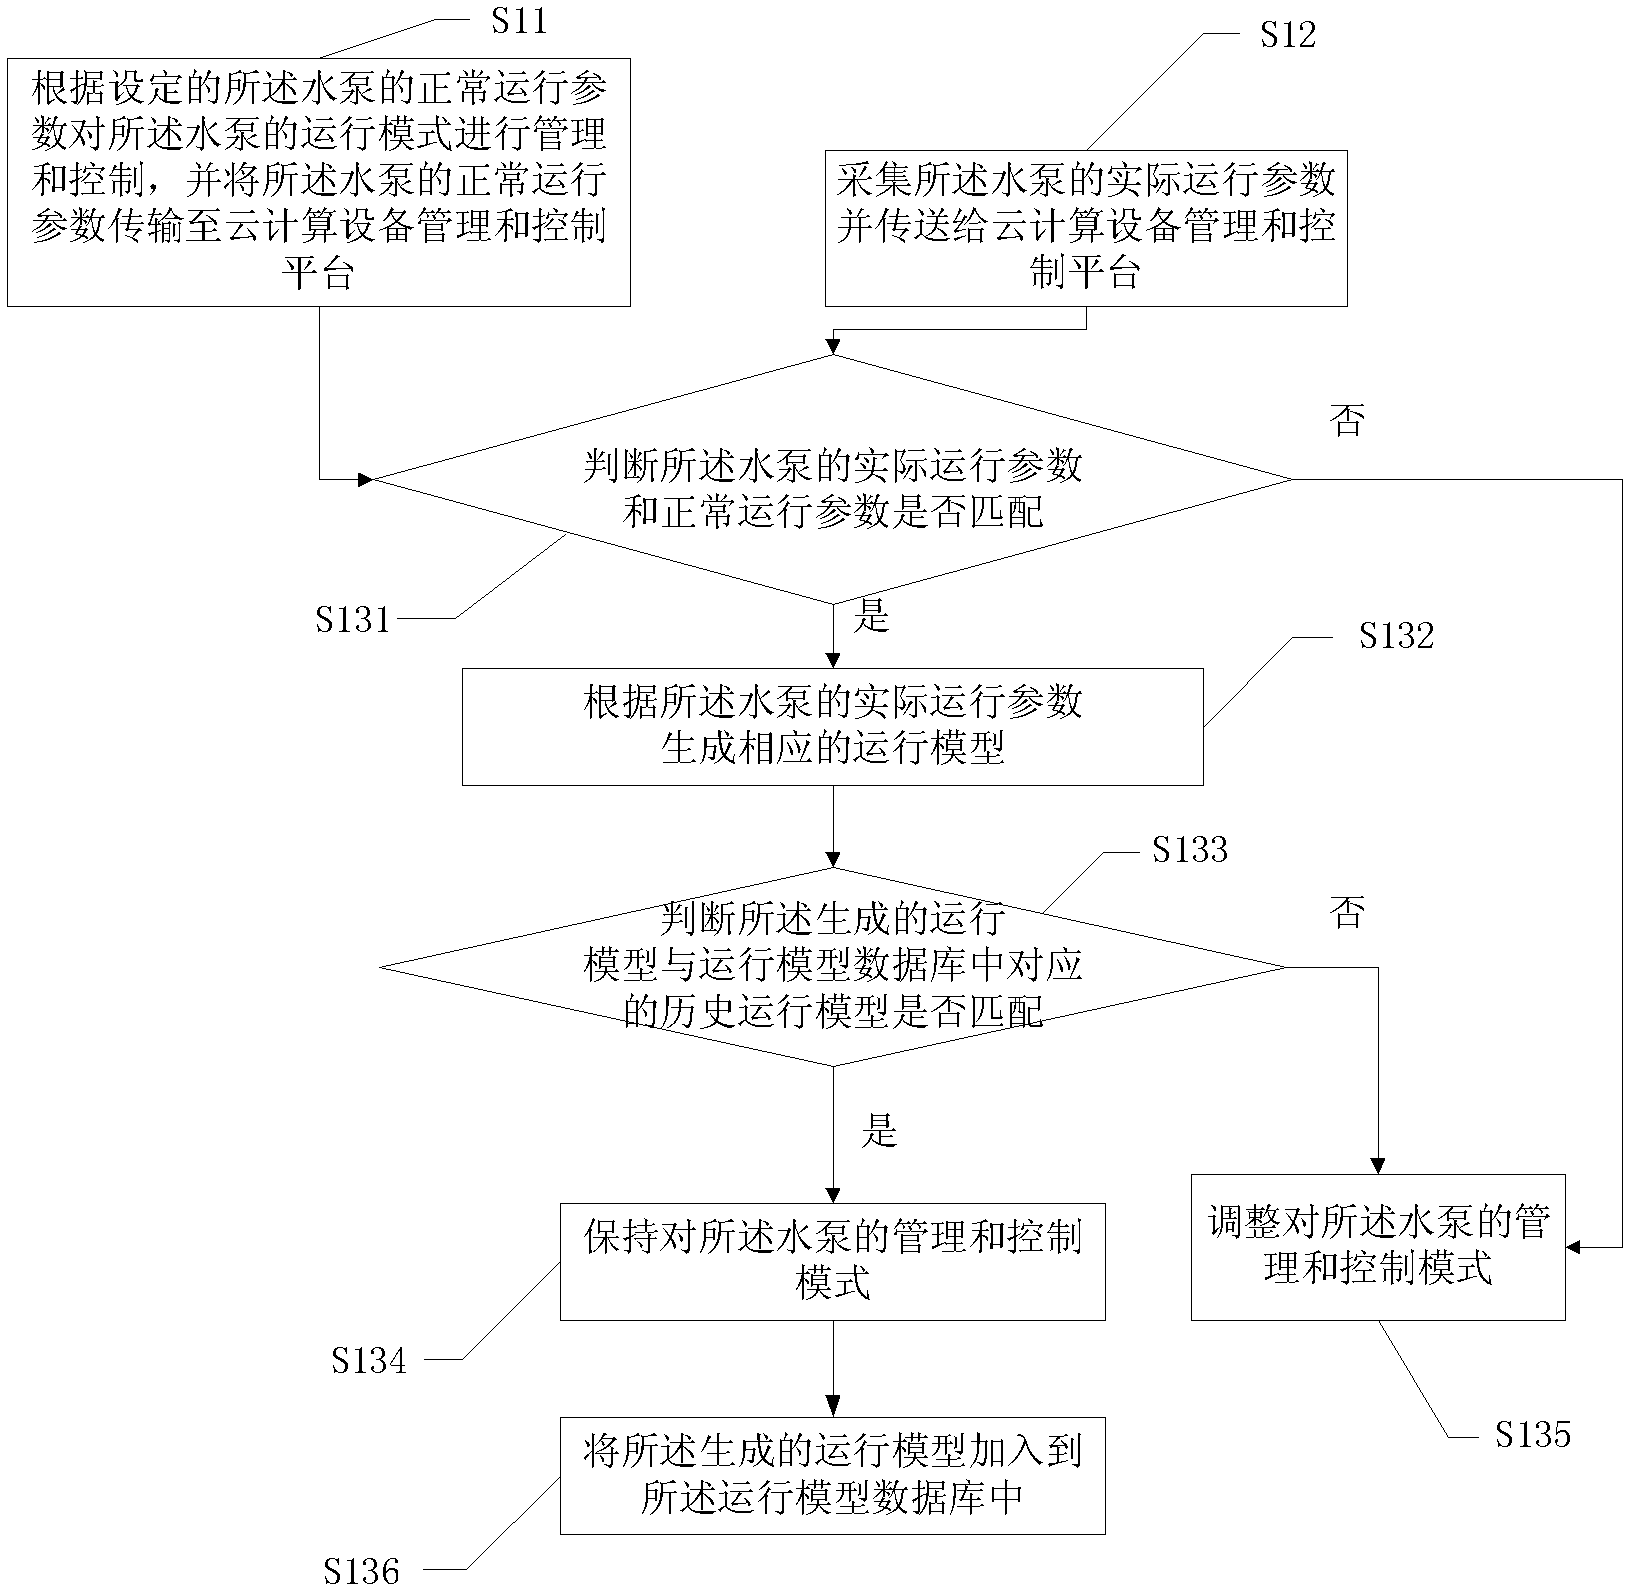 System and method for managing and controlling water pump based on cloud computing